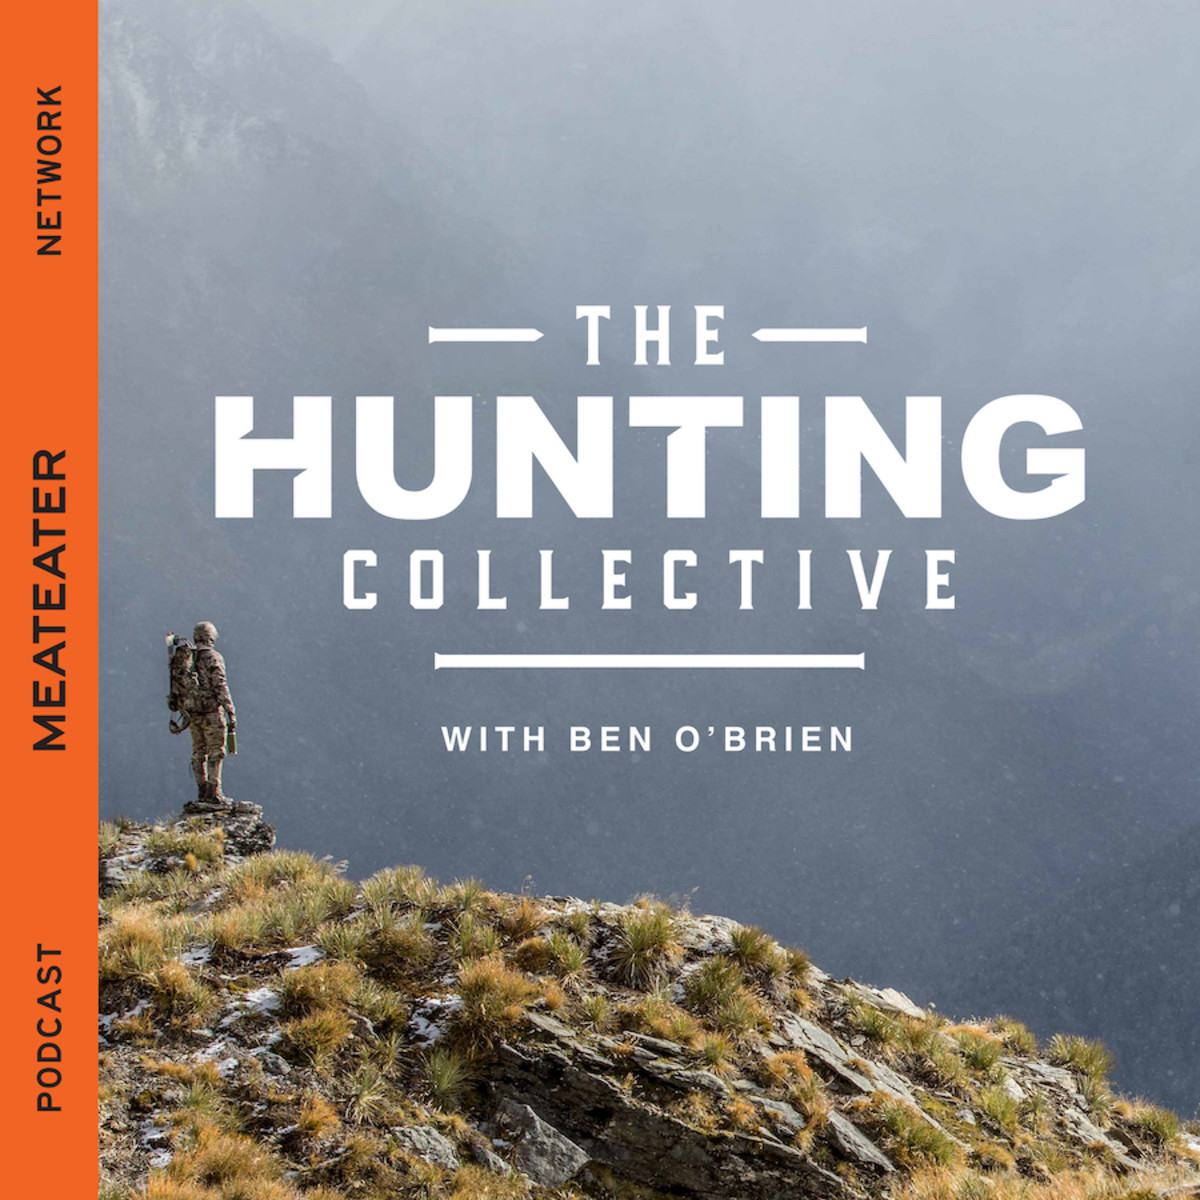 Ep. 83: Whiskey and Ethics: The Value of the Grip and Grin with Steven Rinella